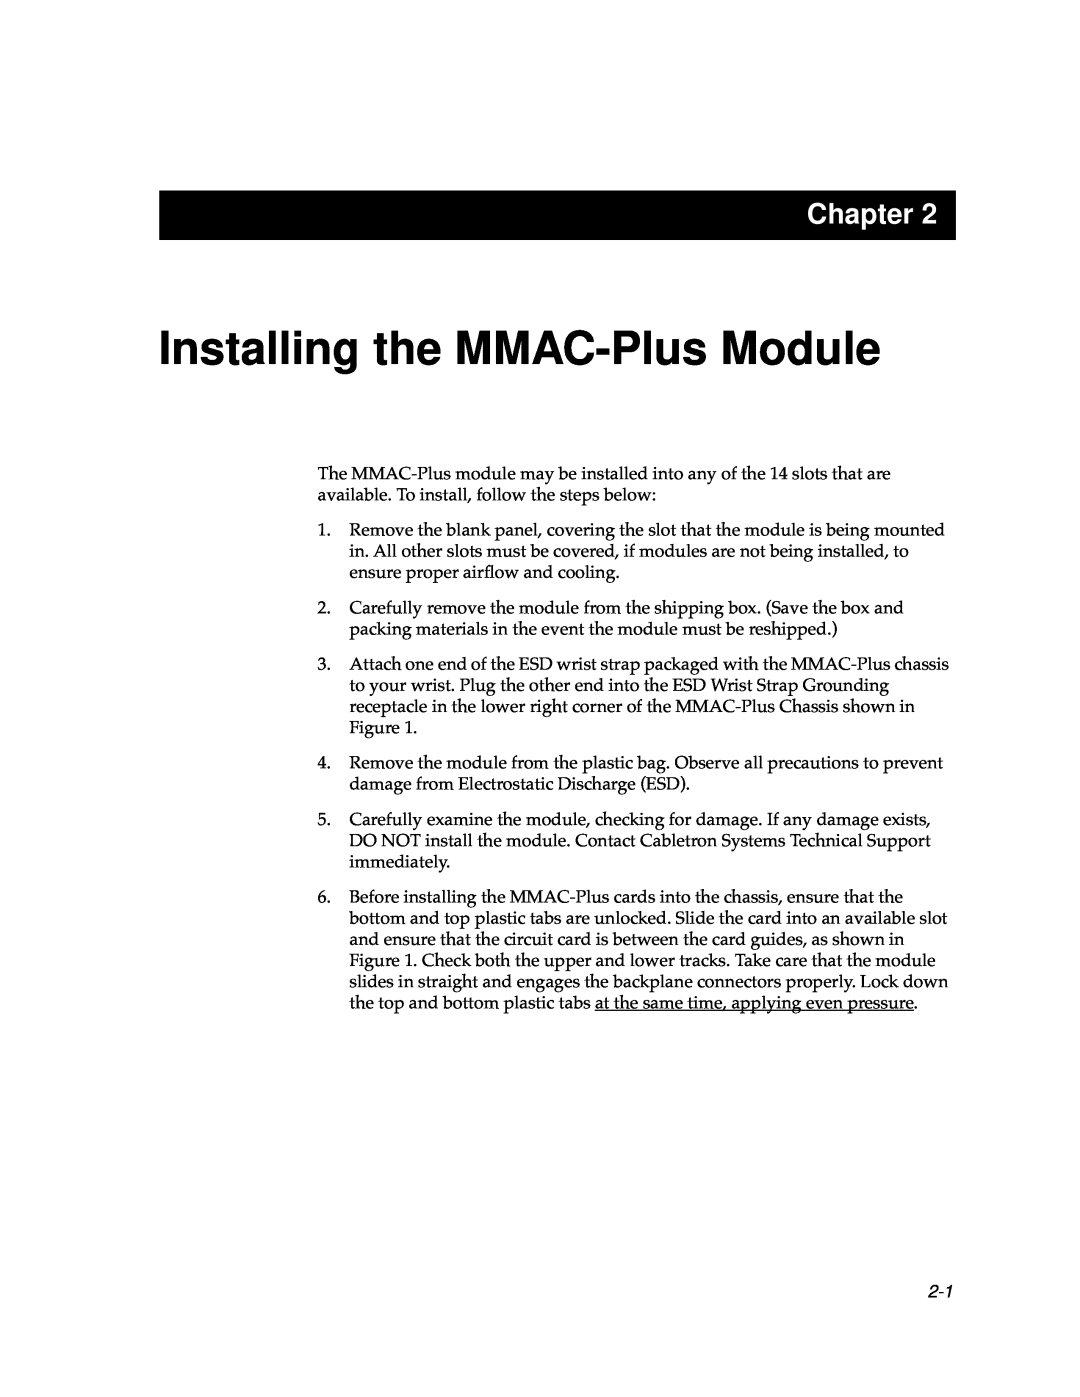 Cabletron Systems 9W111-08 manual Installing the MMAC-Plus Module, Chapter 